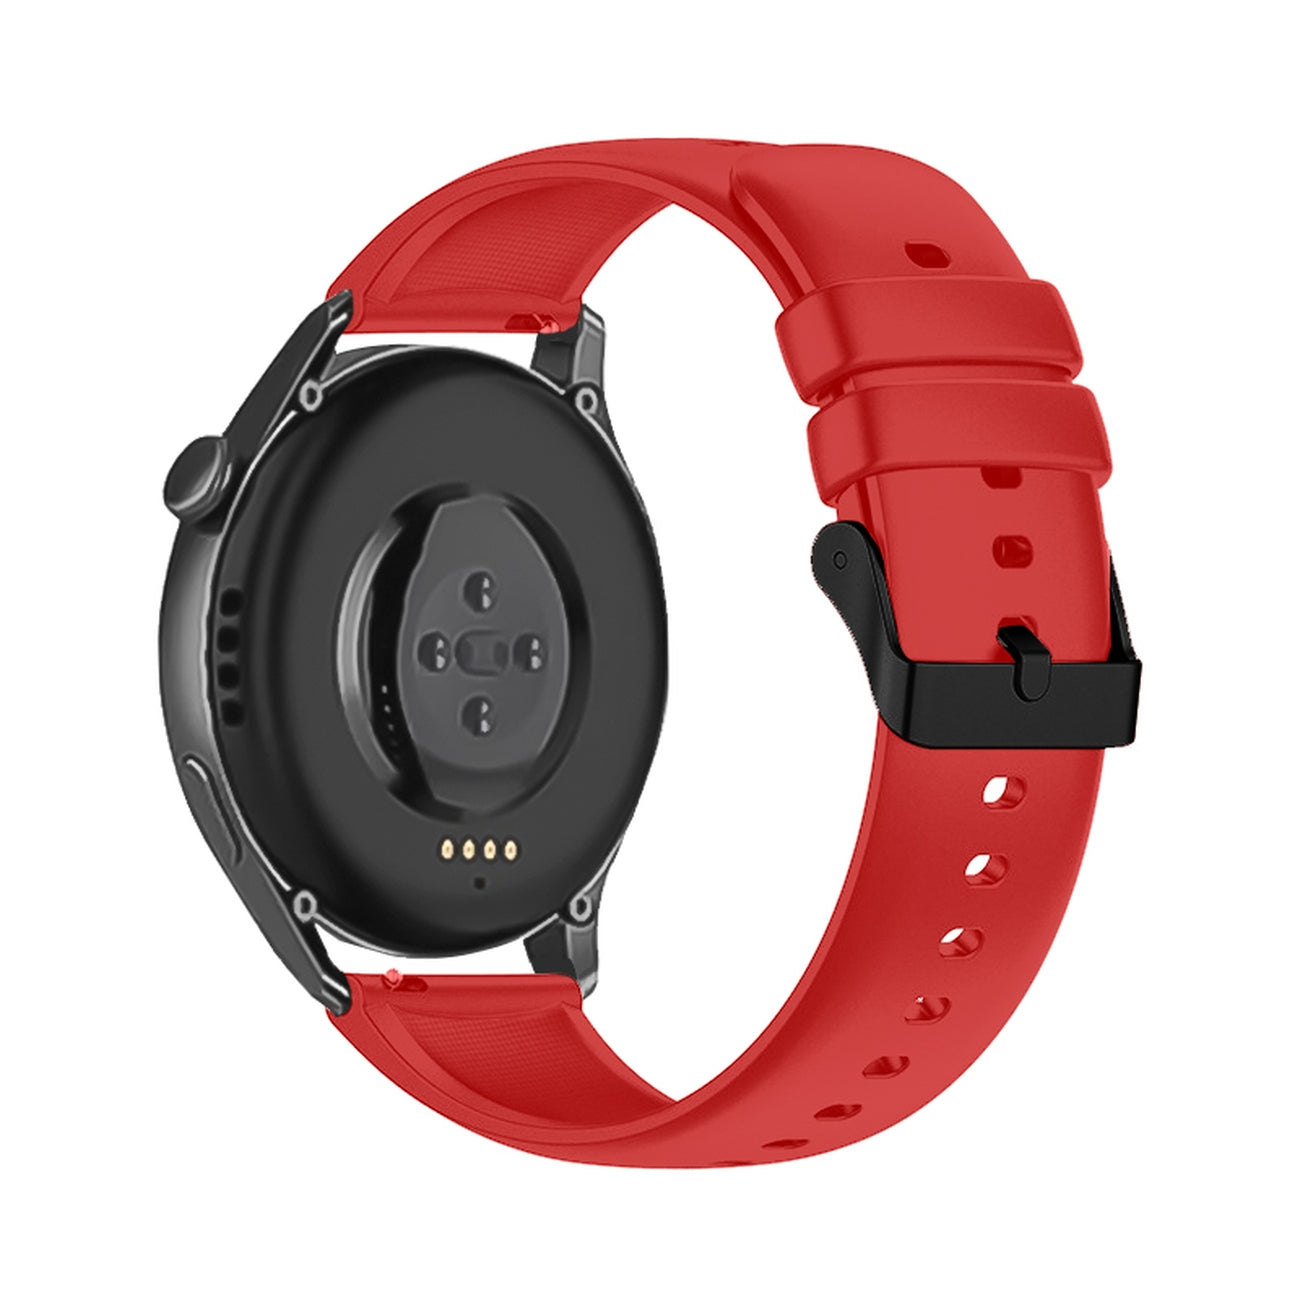 Strap One silicone band strap bracelet bracelet for Huawei Watch GT 3 42 mm red